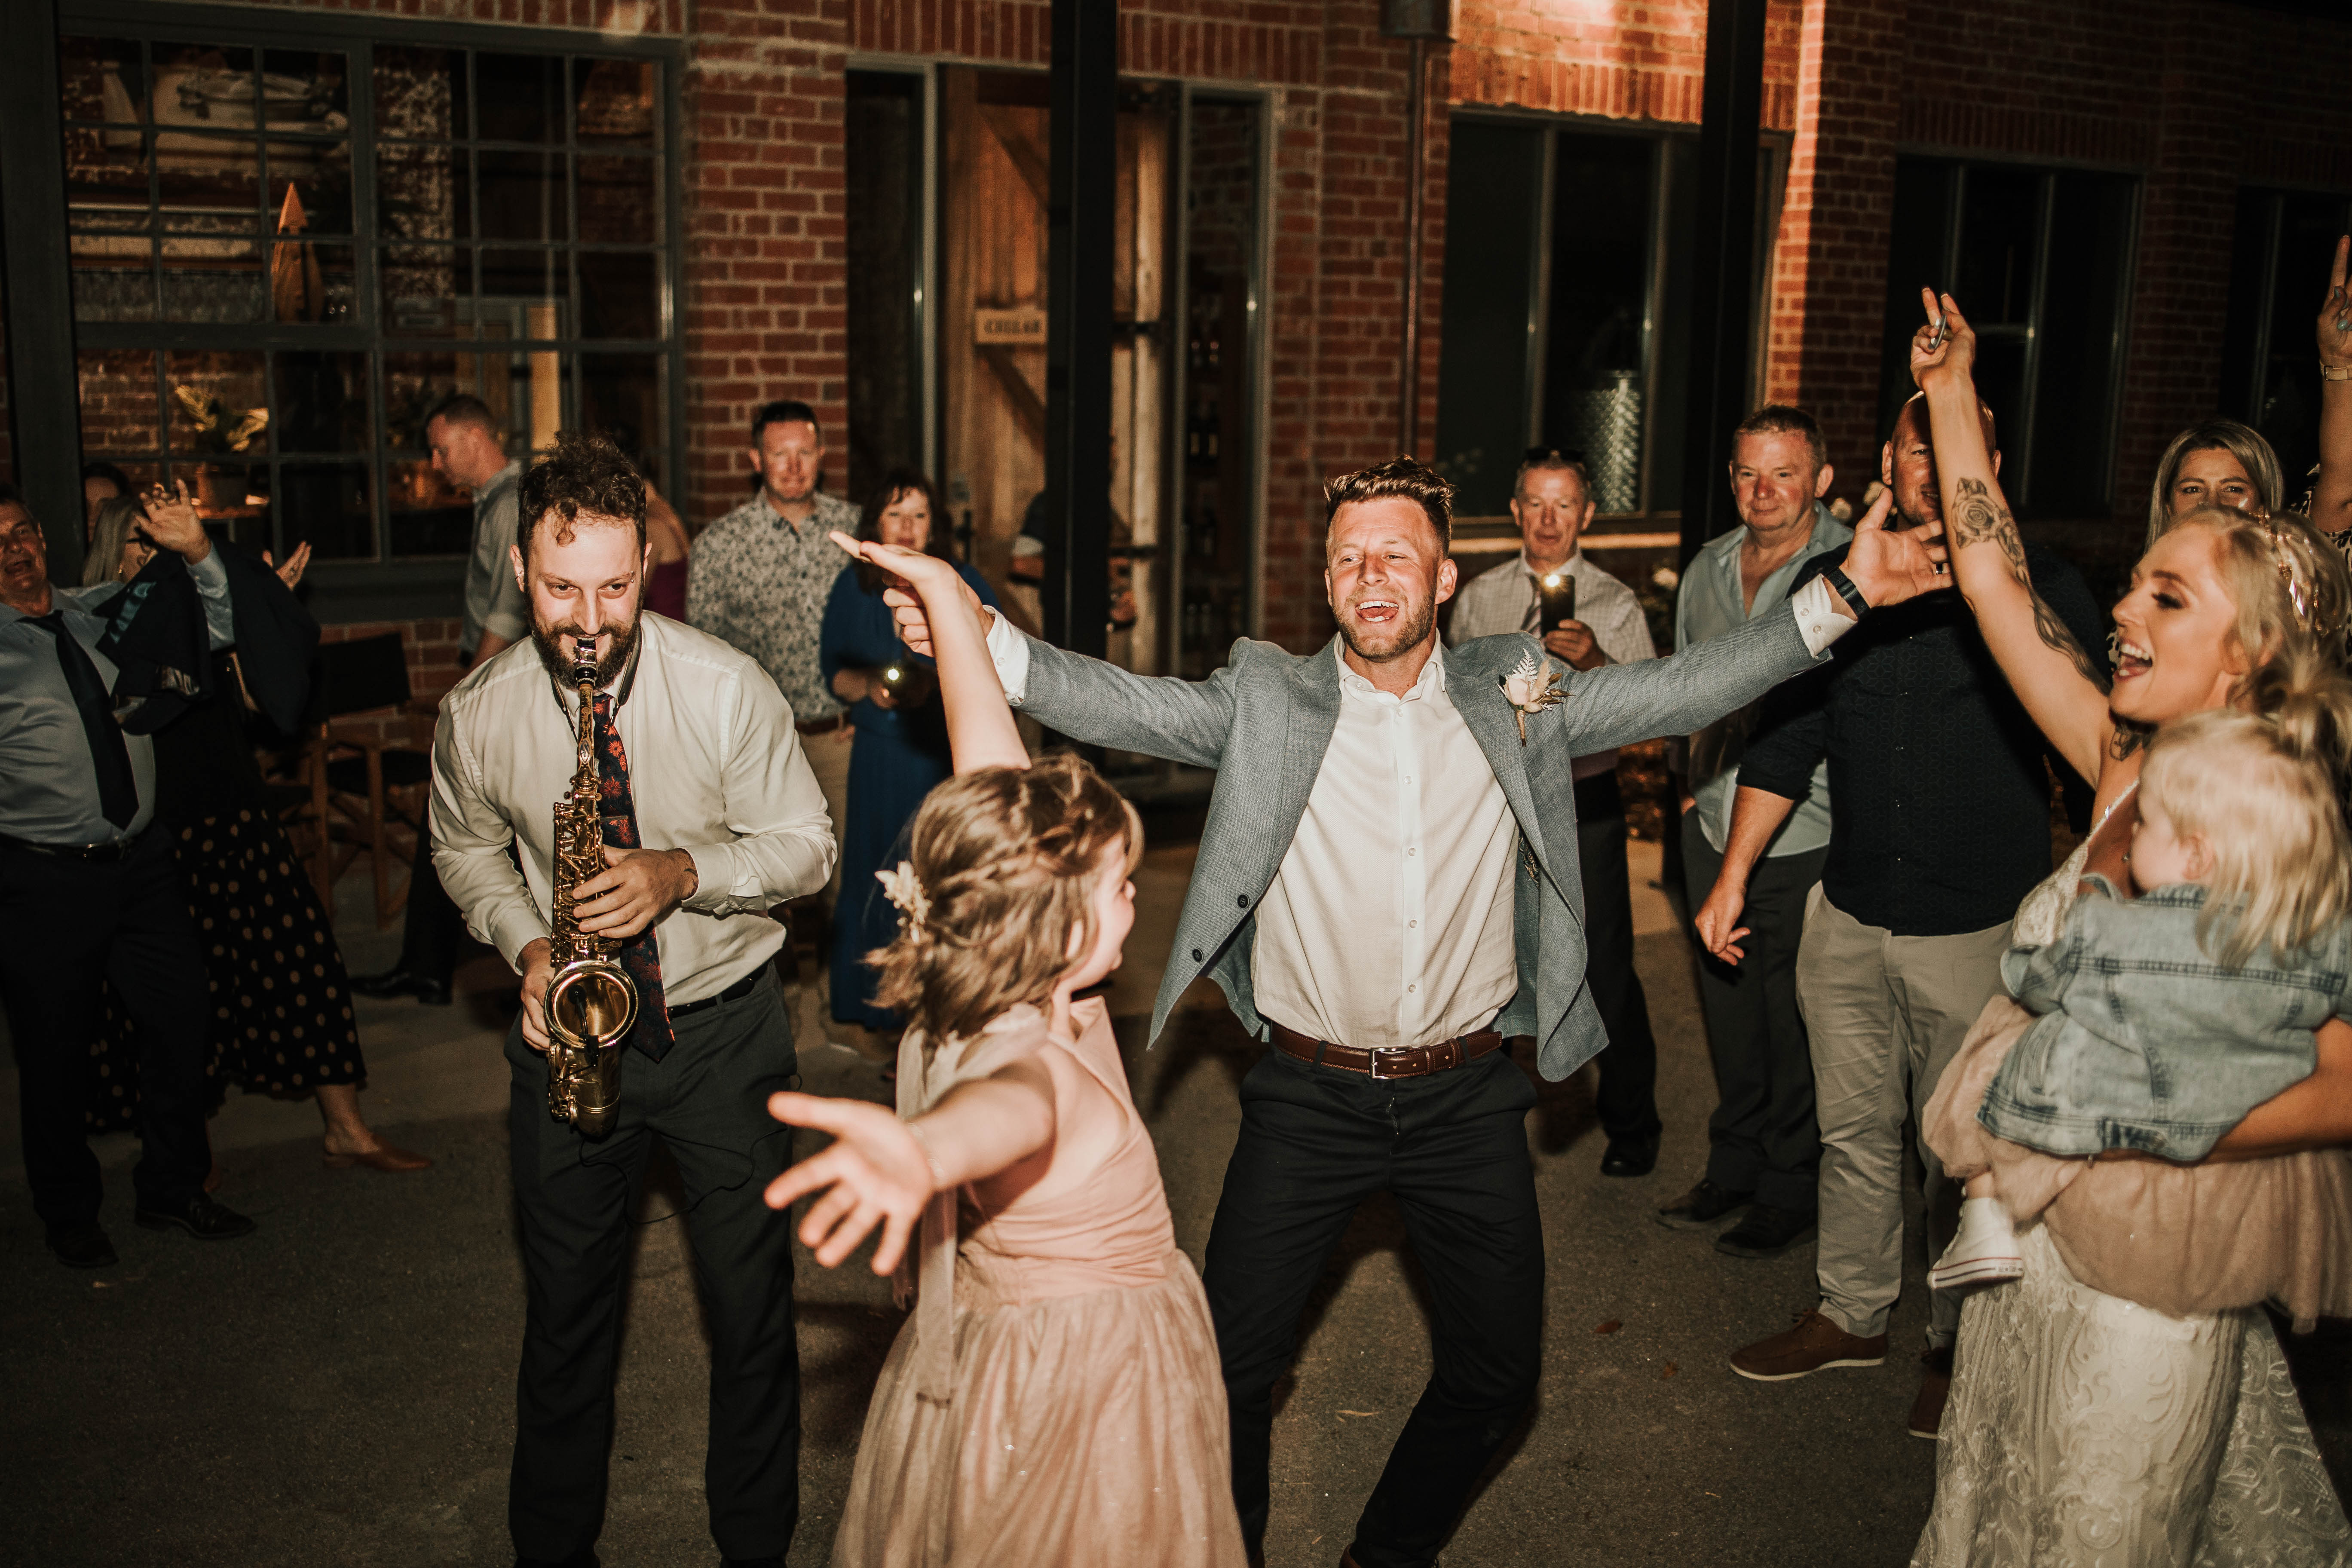 Flower girl and groom take on the dance floor at the reception.